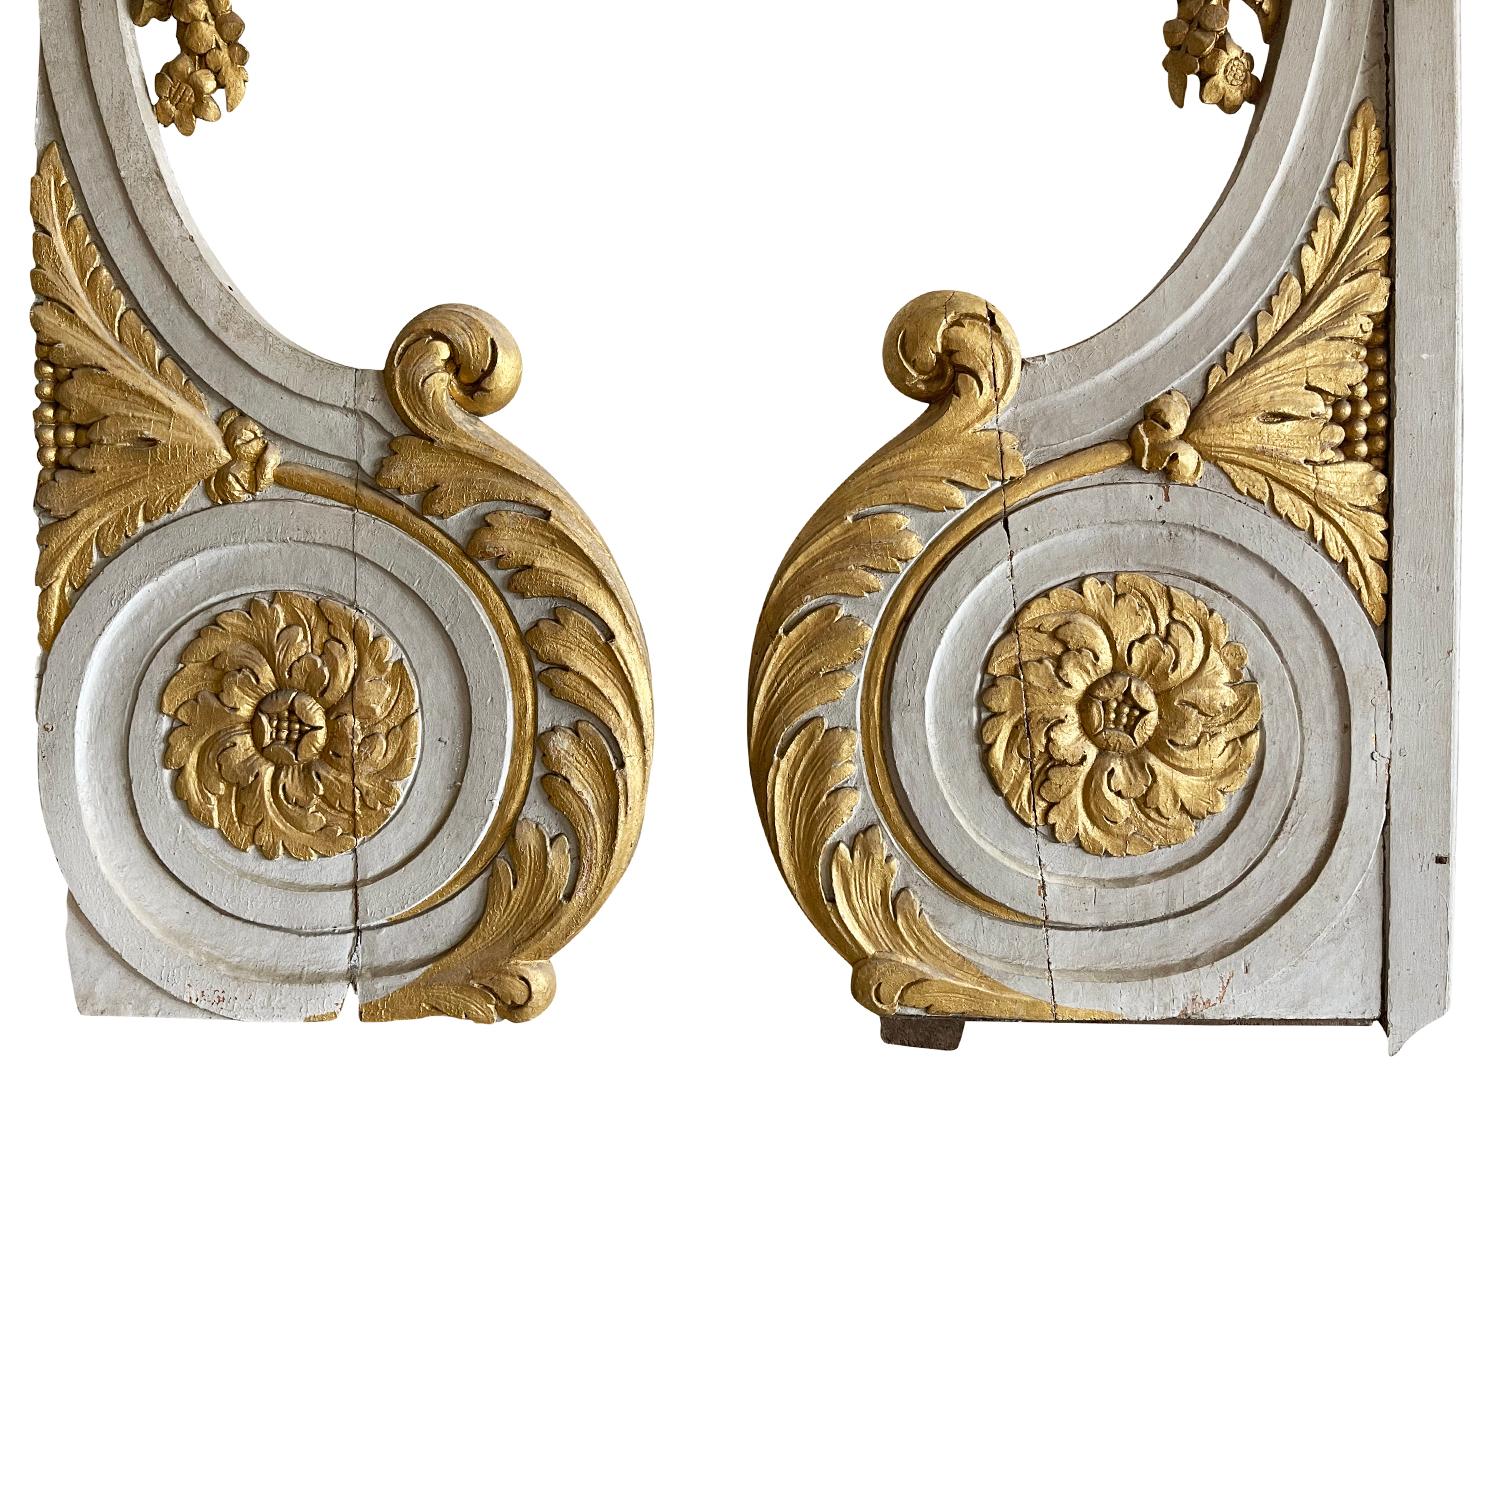 18th Century French Pair of Gilt Baroque Fragments - Antique Wall Panels In Good Condition For Sale In West Palm Beach, FL